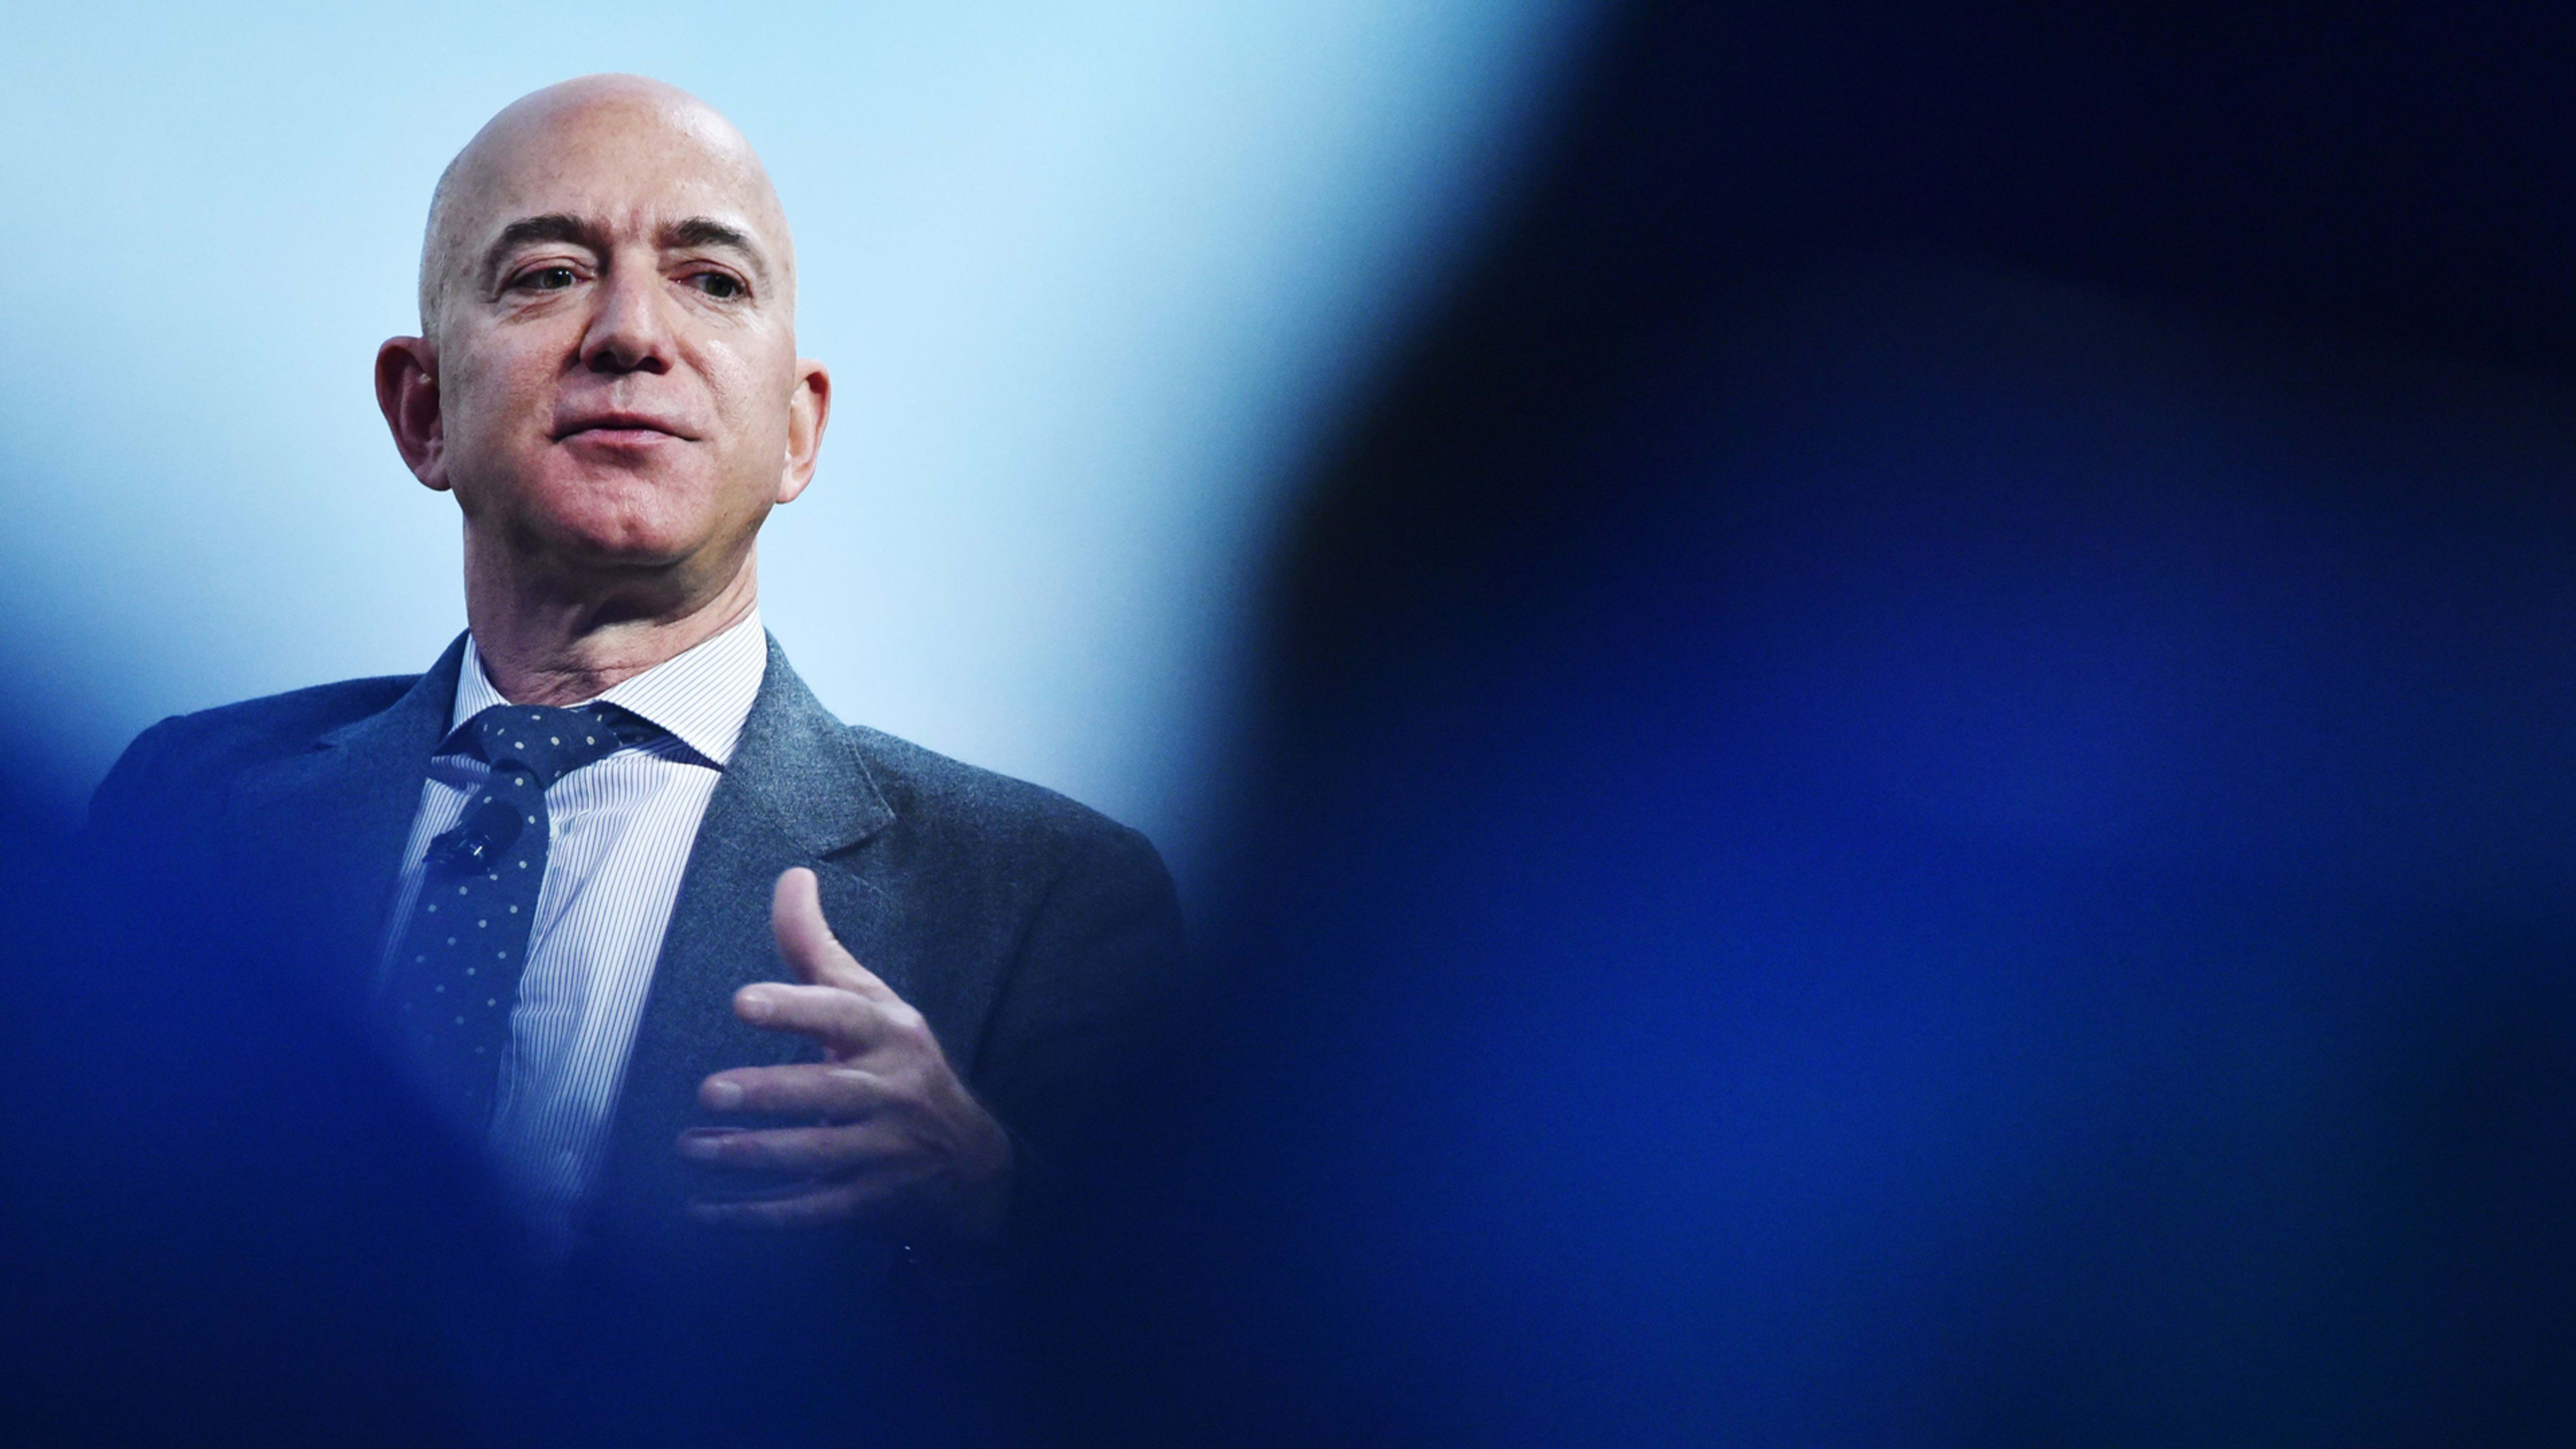 3 things Jeff Bezos looks for in job candidates